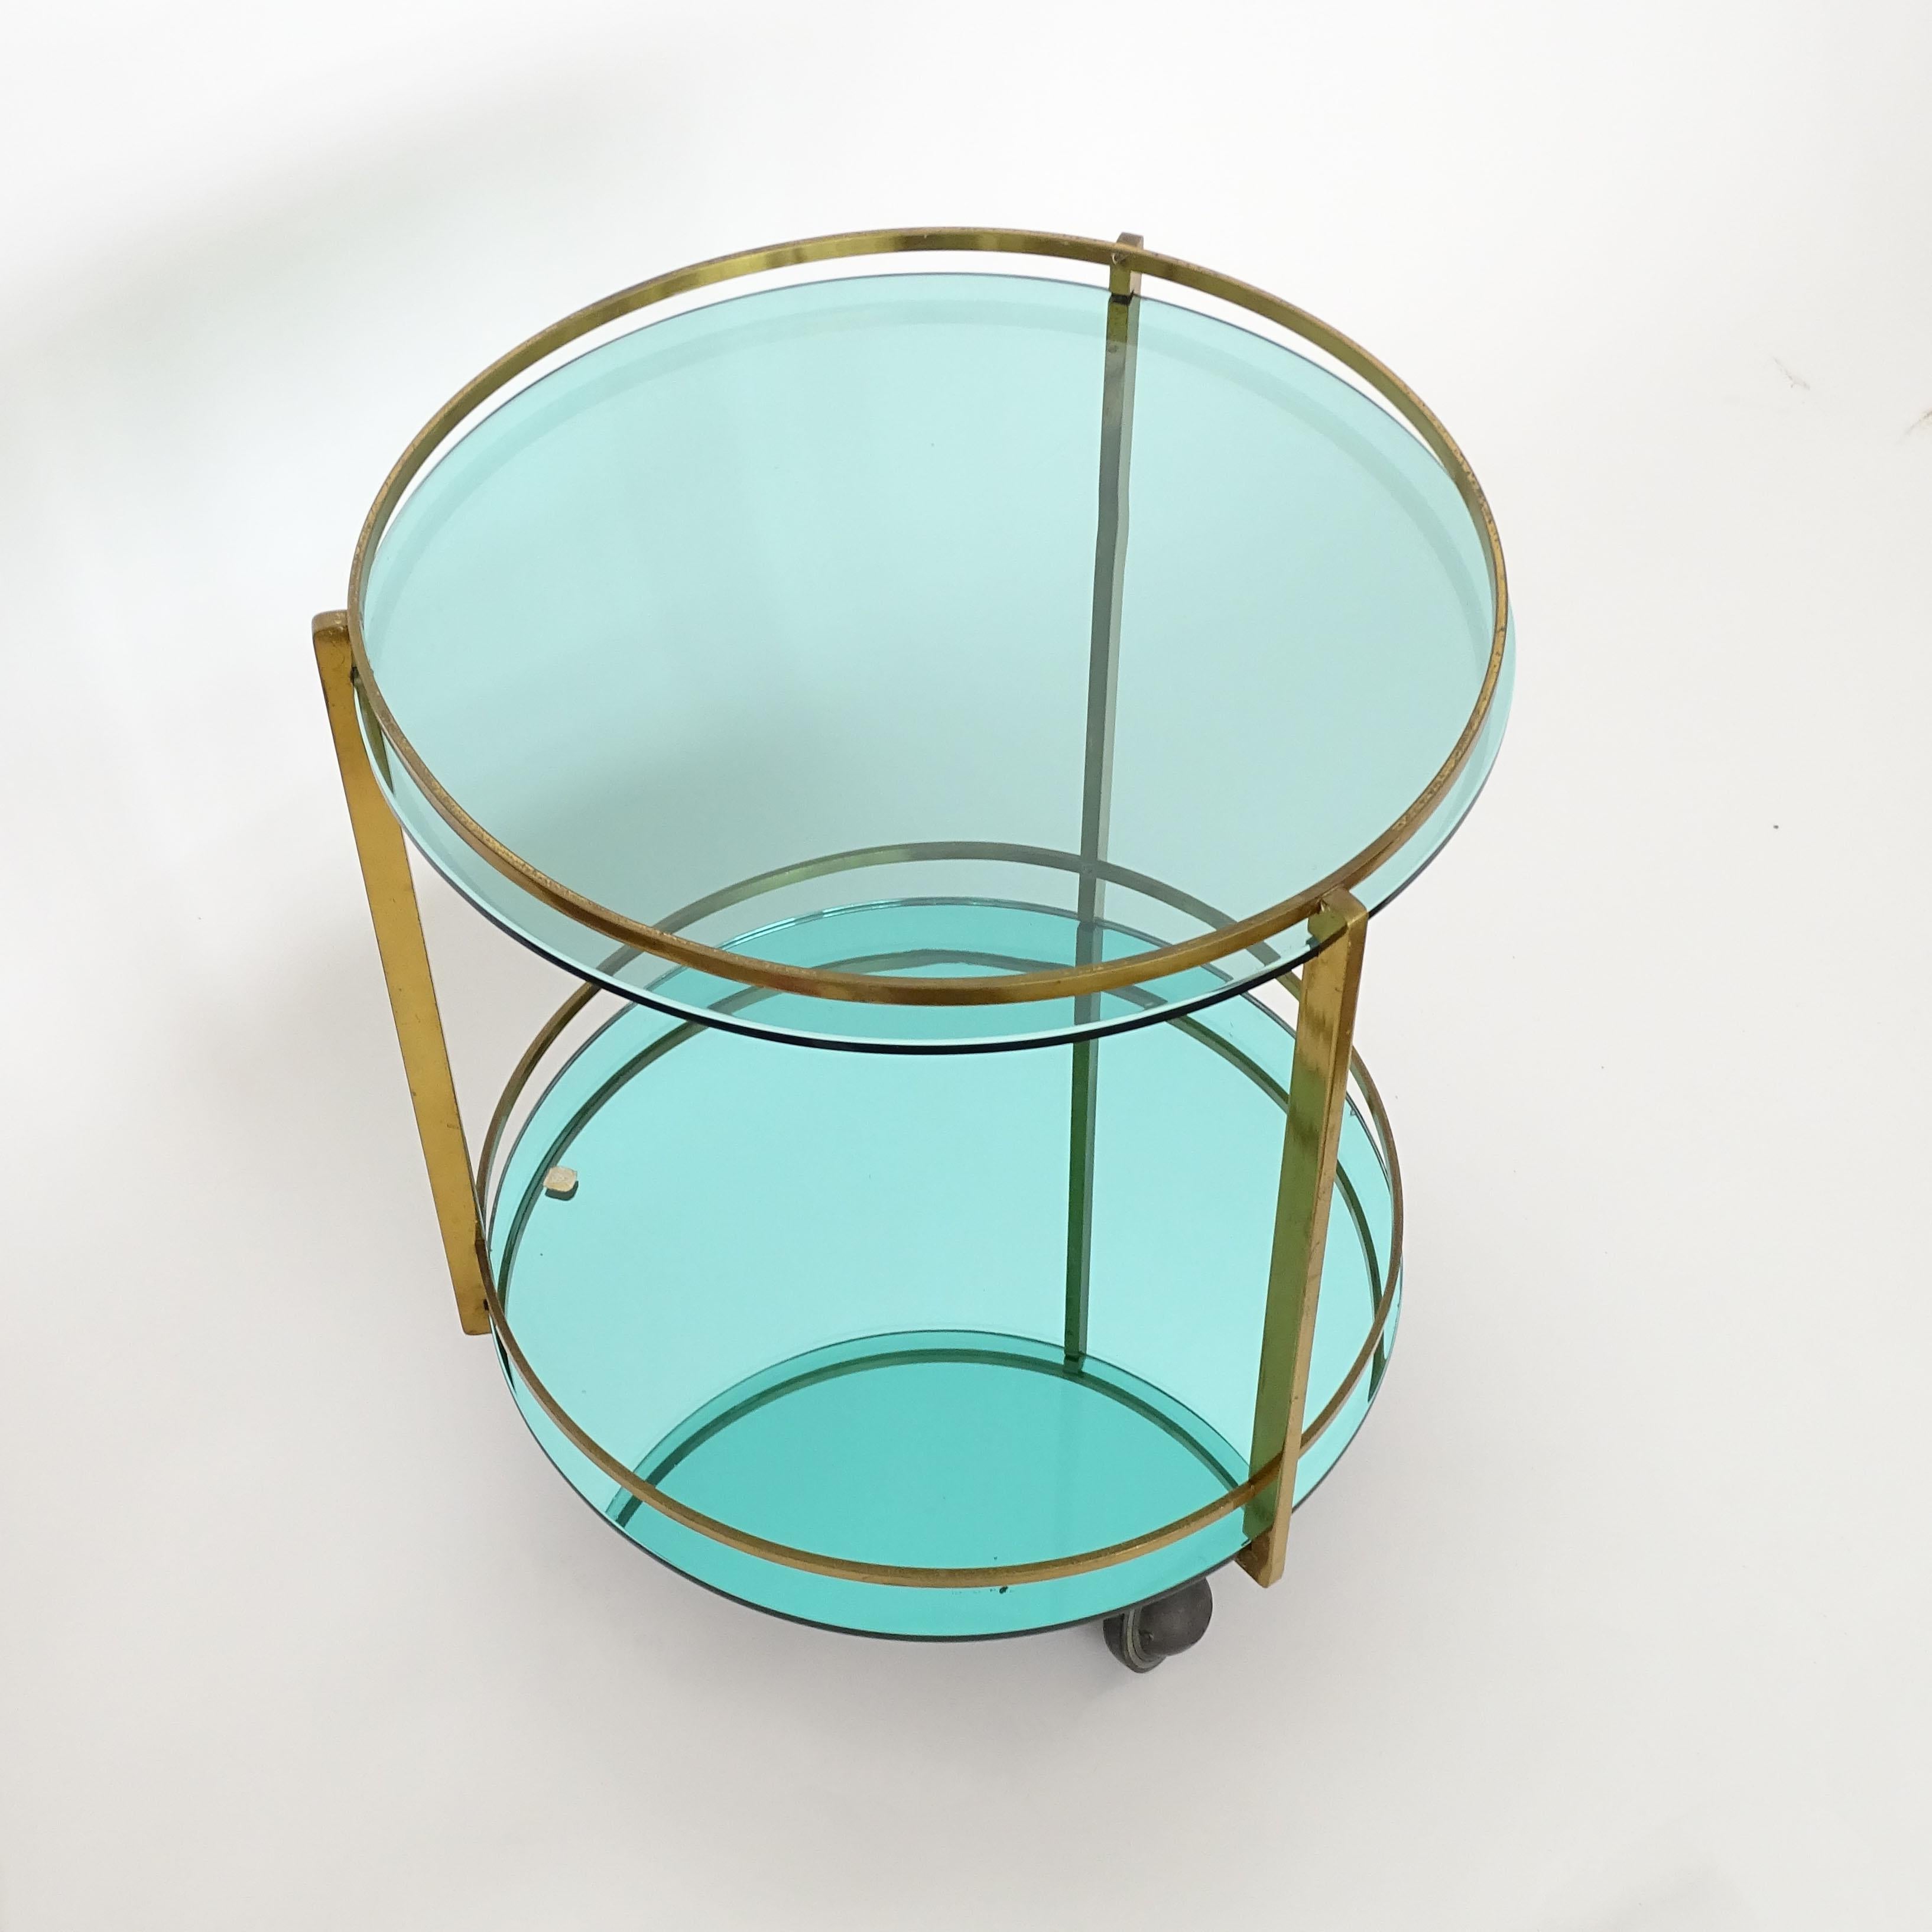 Splendid and rare Max Ingrand Ber Cart for Fontana Arte.
Italy 1960s
All original glass parts are in the classic Fontana green.
The base glass is green mirrored, and the top glass is tinted green.
The cart carries the original FA Label.
Reference: